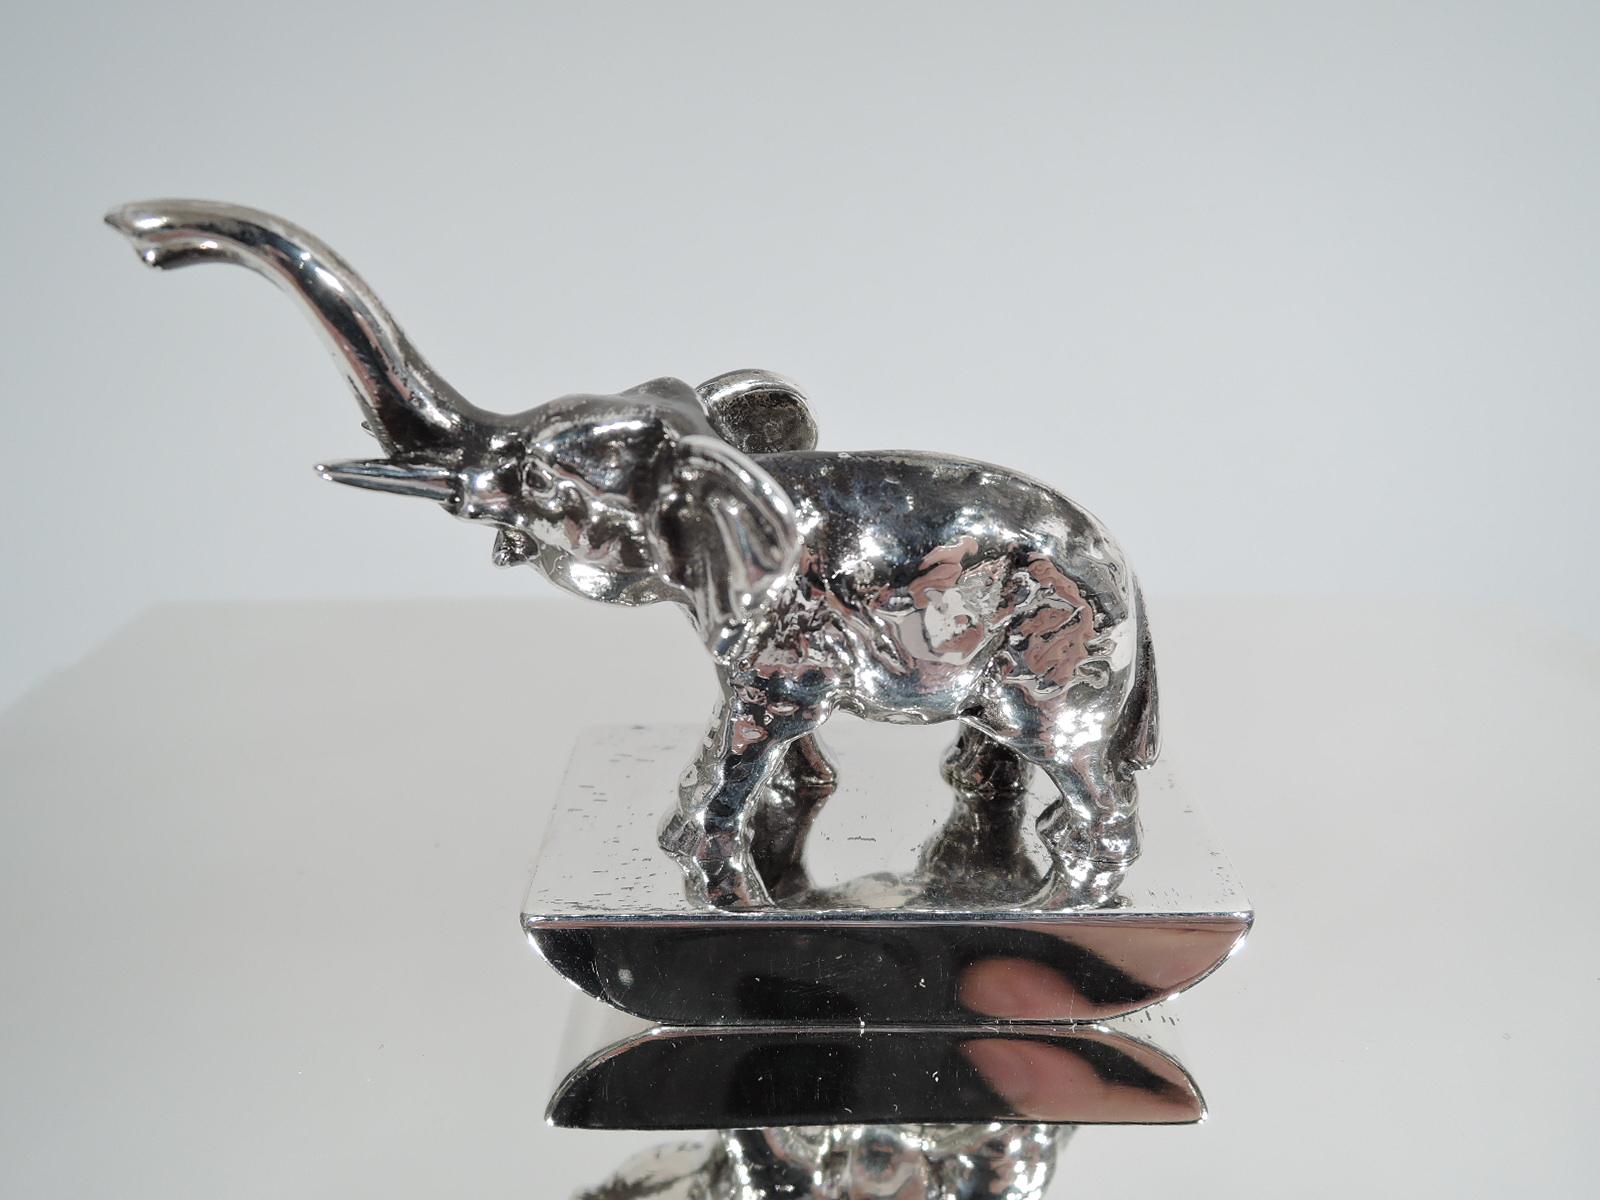 20th Century American Art Deco Sterling Silver Box with Elephant Finial